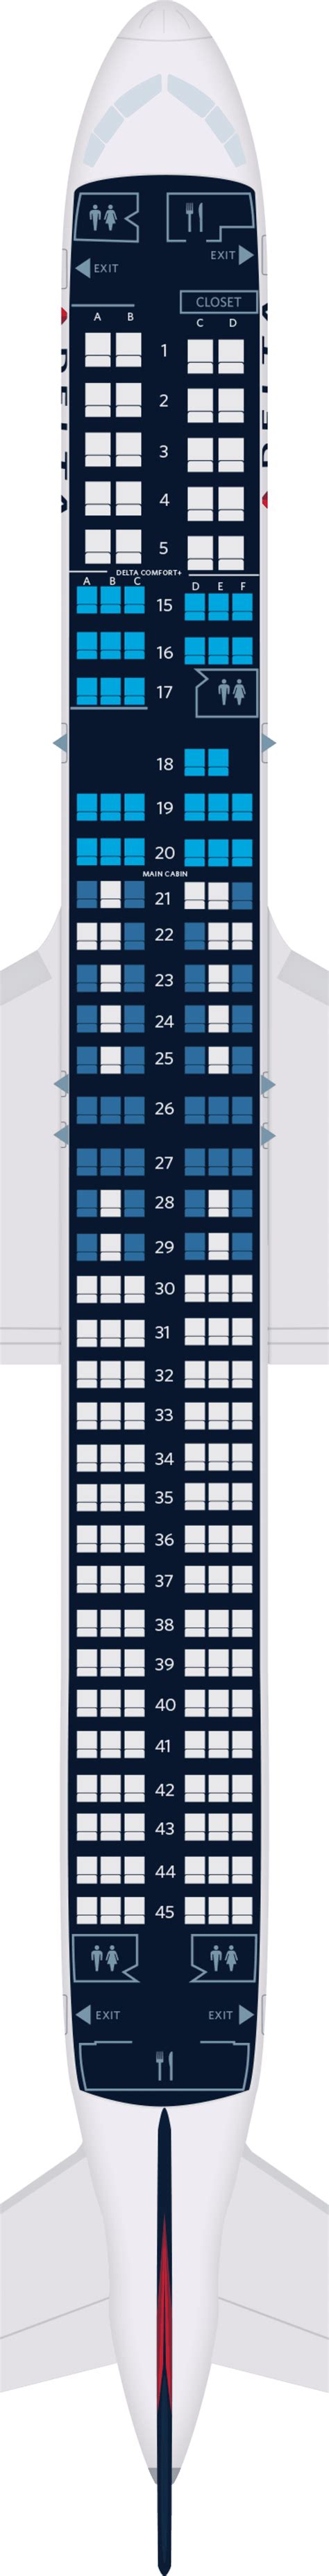 For your next Delta flight, use this seating chart to get the most comfortable seats, legroom, and recline on . Seat Maps; Airlines; Cheap Flights; Comparison Charts ... Boeing 757-200 (75D) Boeing 757-200 (75G) Boeing 757-200 (75P) Boeing 757-200 (75S) Boeing 757-300 (75Y). 